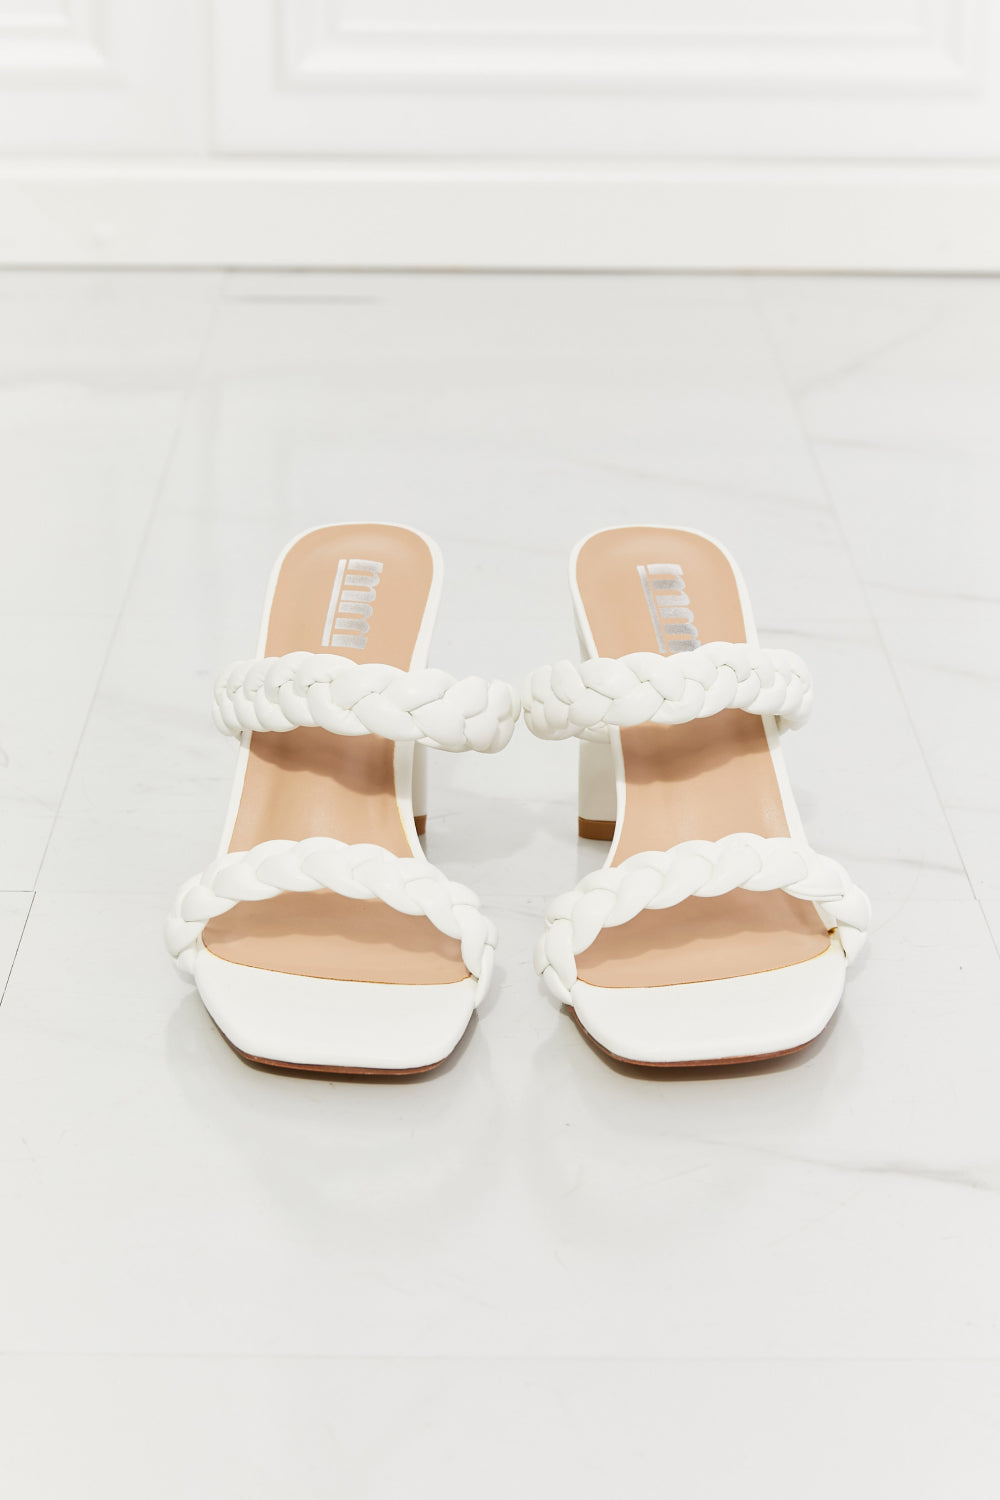 MMShoes In Love Double Braided Block Heel Sandal in White - Tigbul's Fashion